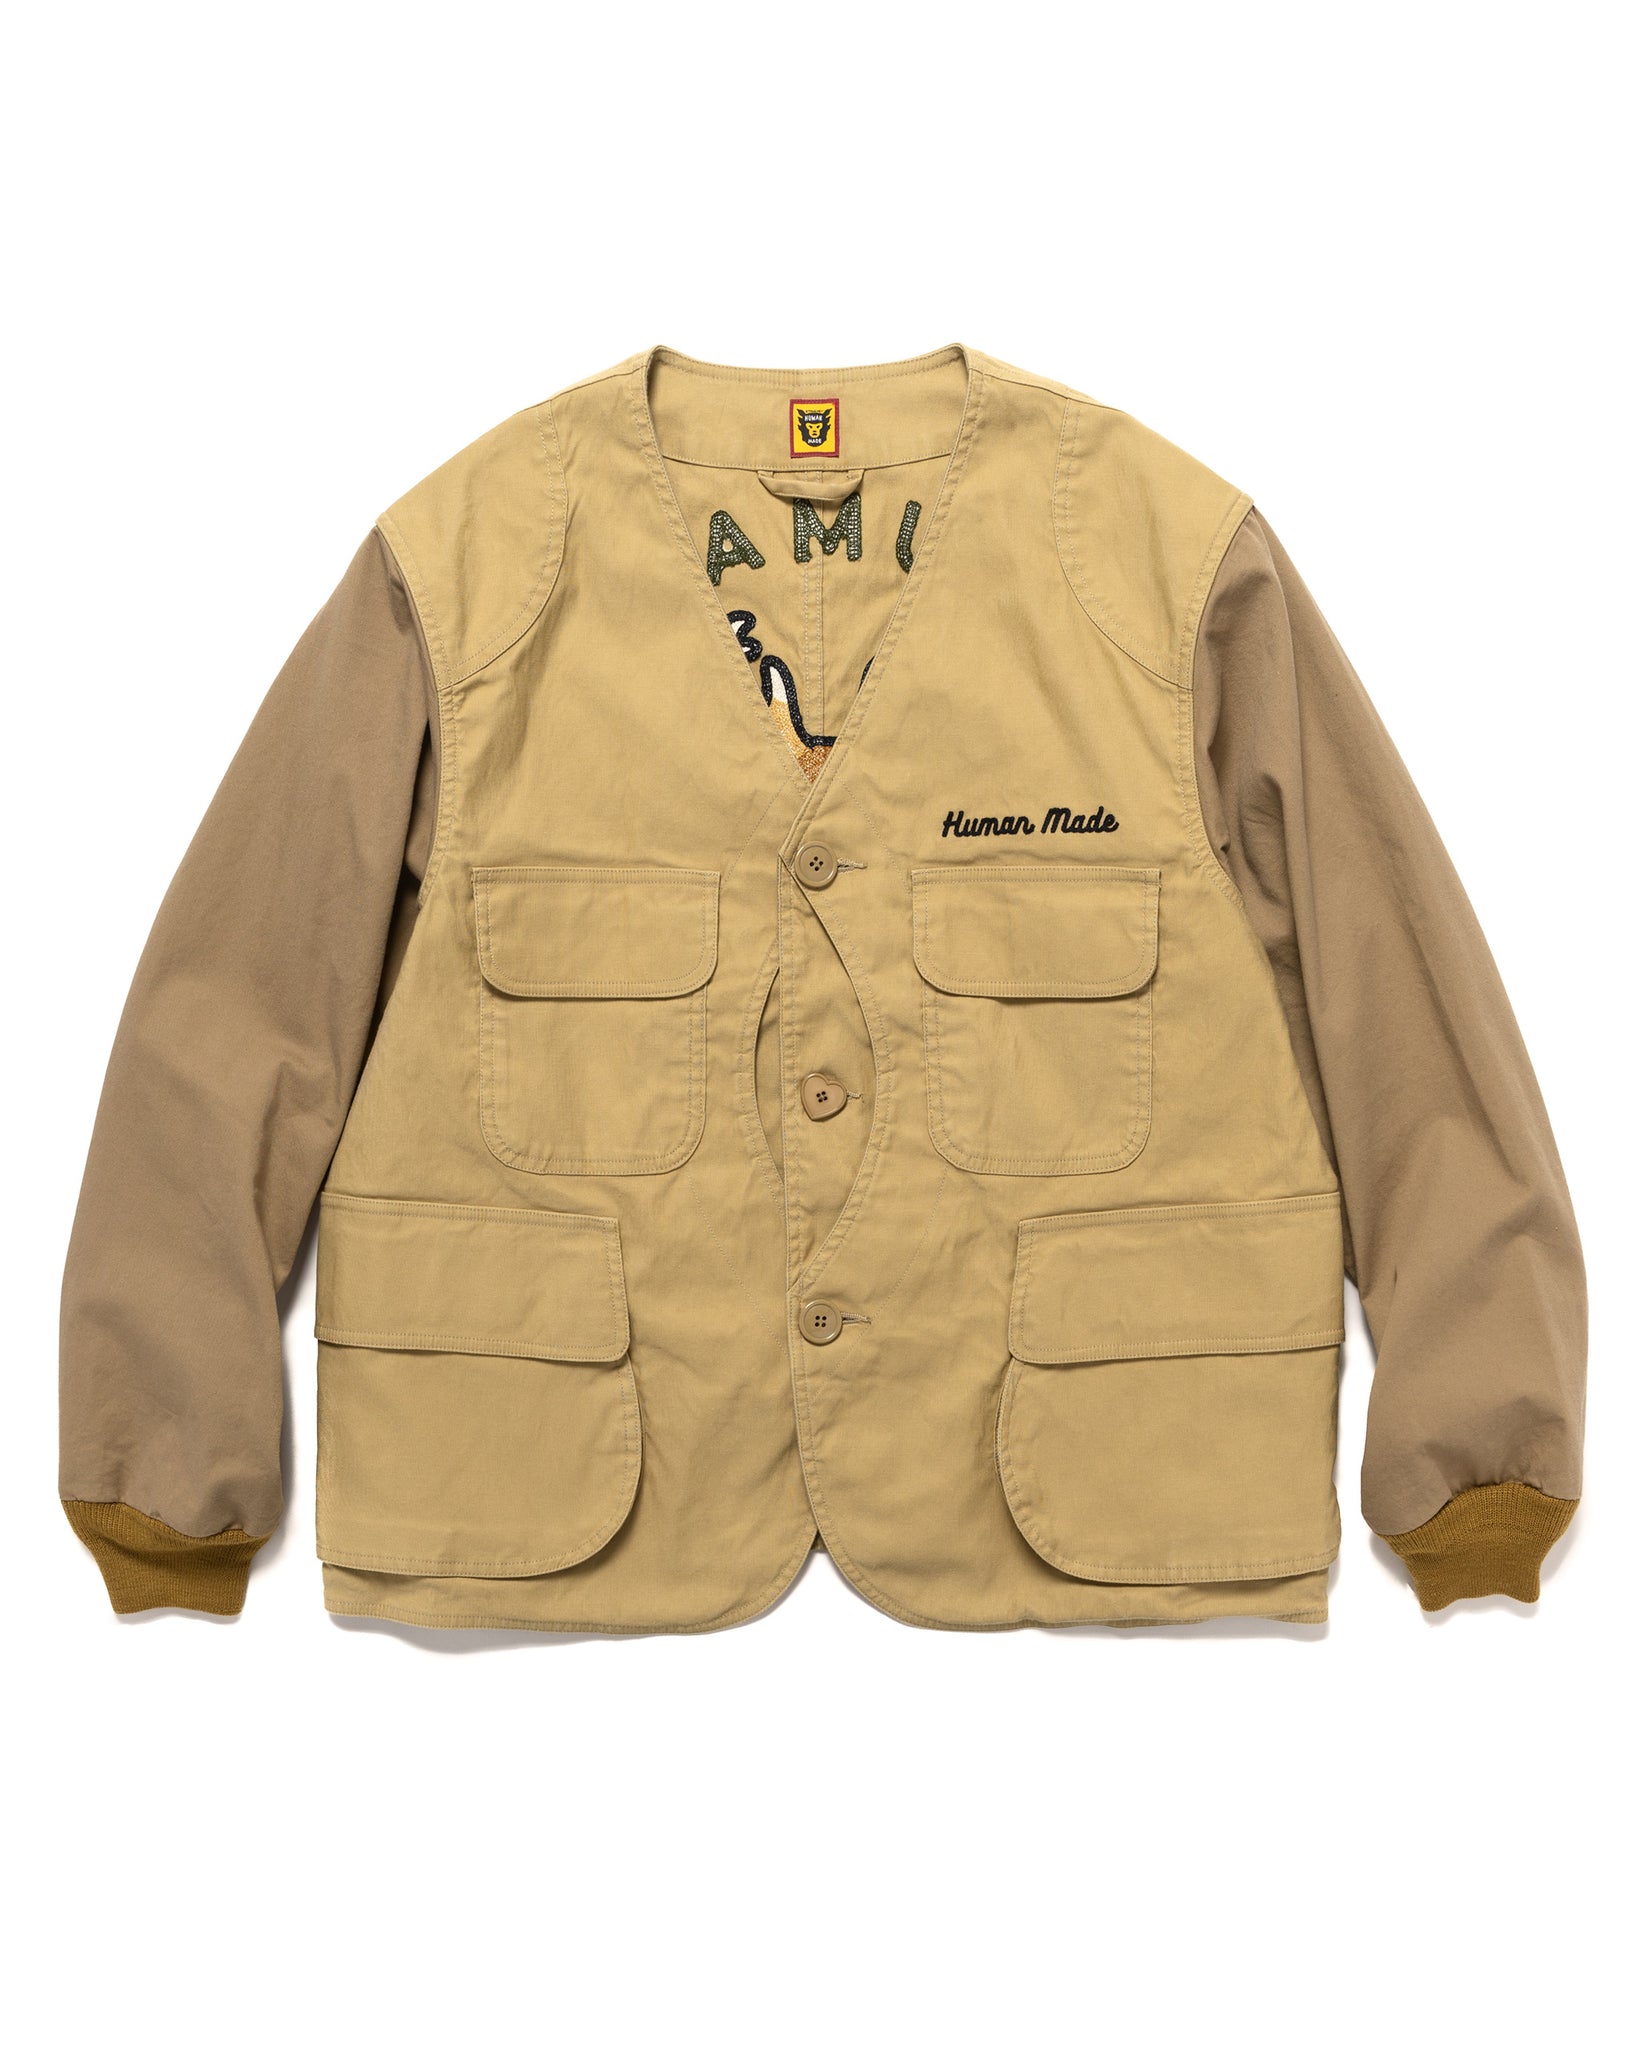 Human Made Patch Jacket Olive Lサイズ キムタク-